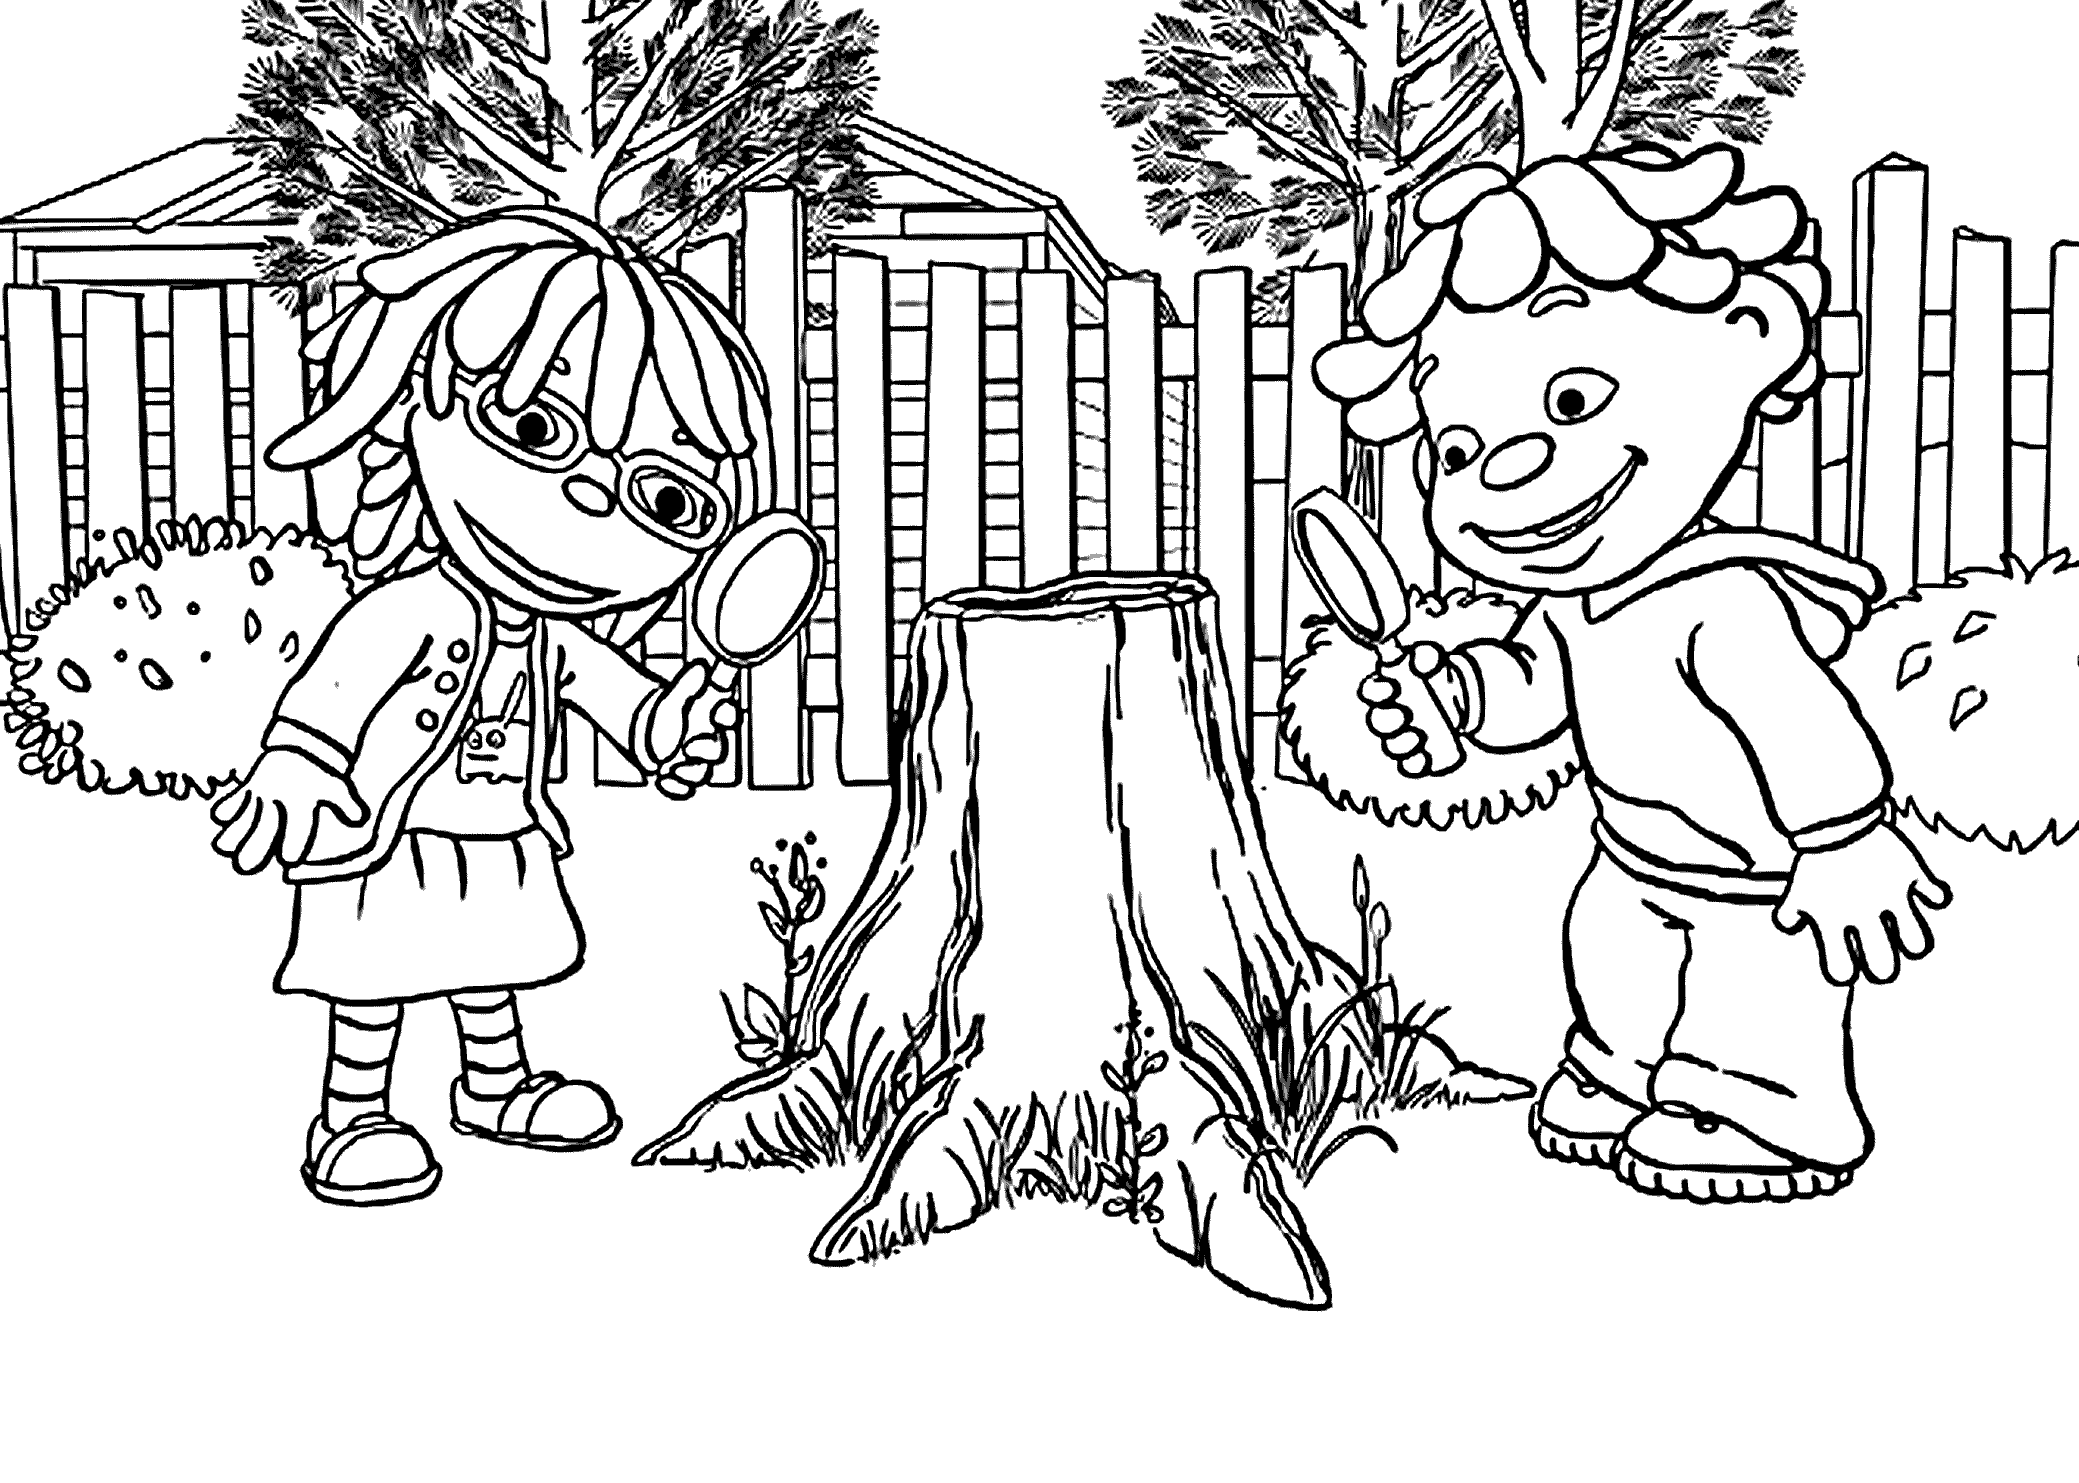 Sid The Science Kid Coloring Page